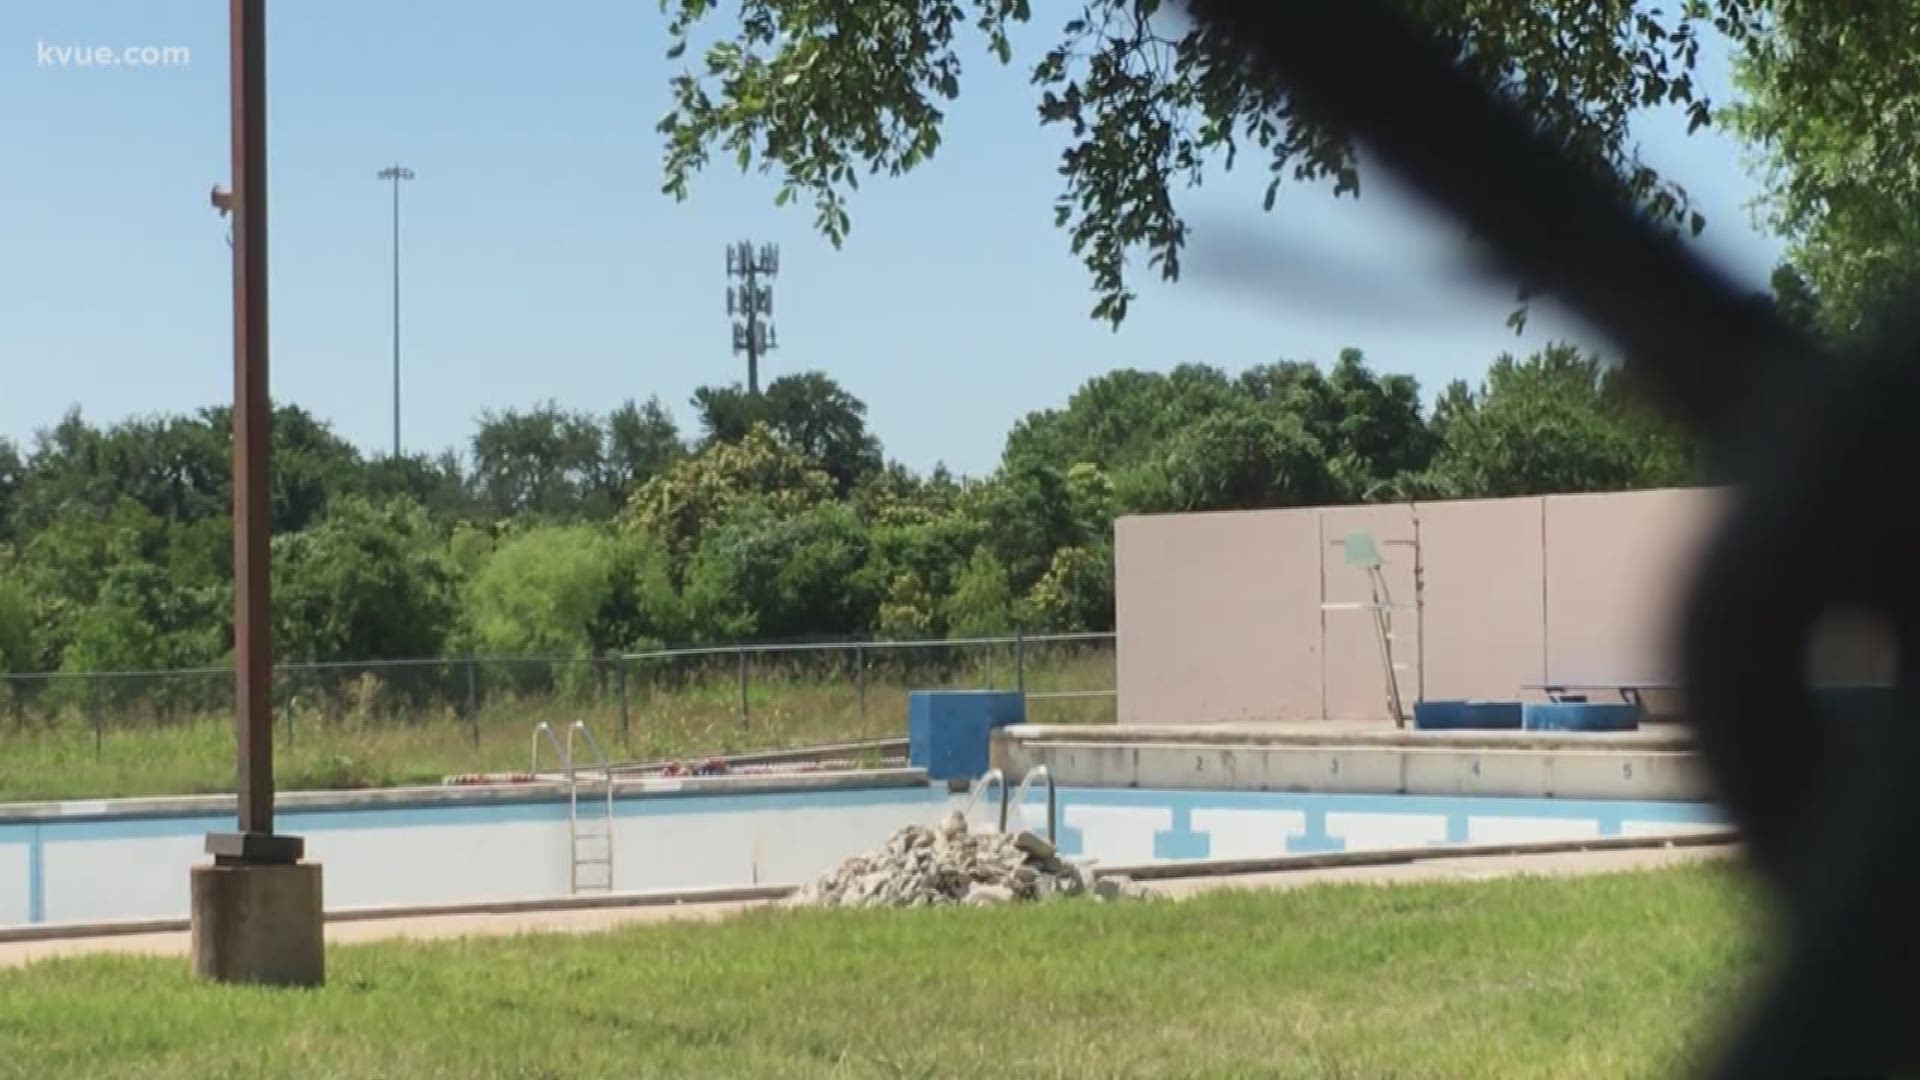 In spite of the heat, many Austin neighborhood pools are still closed. The city says it's following the same schedule as last year. But some people want to see them all open now.